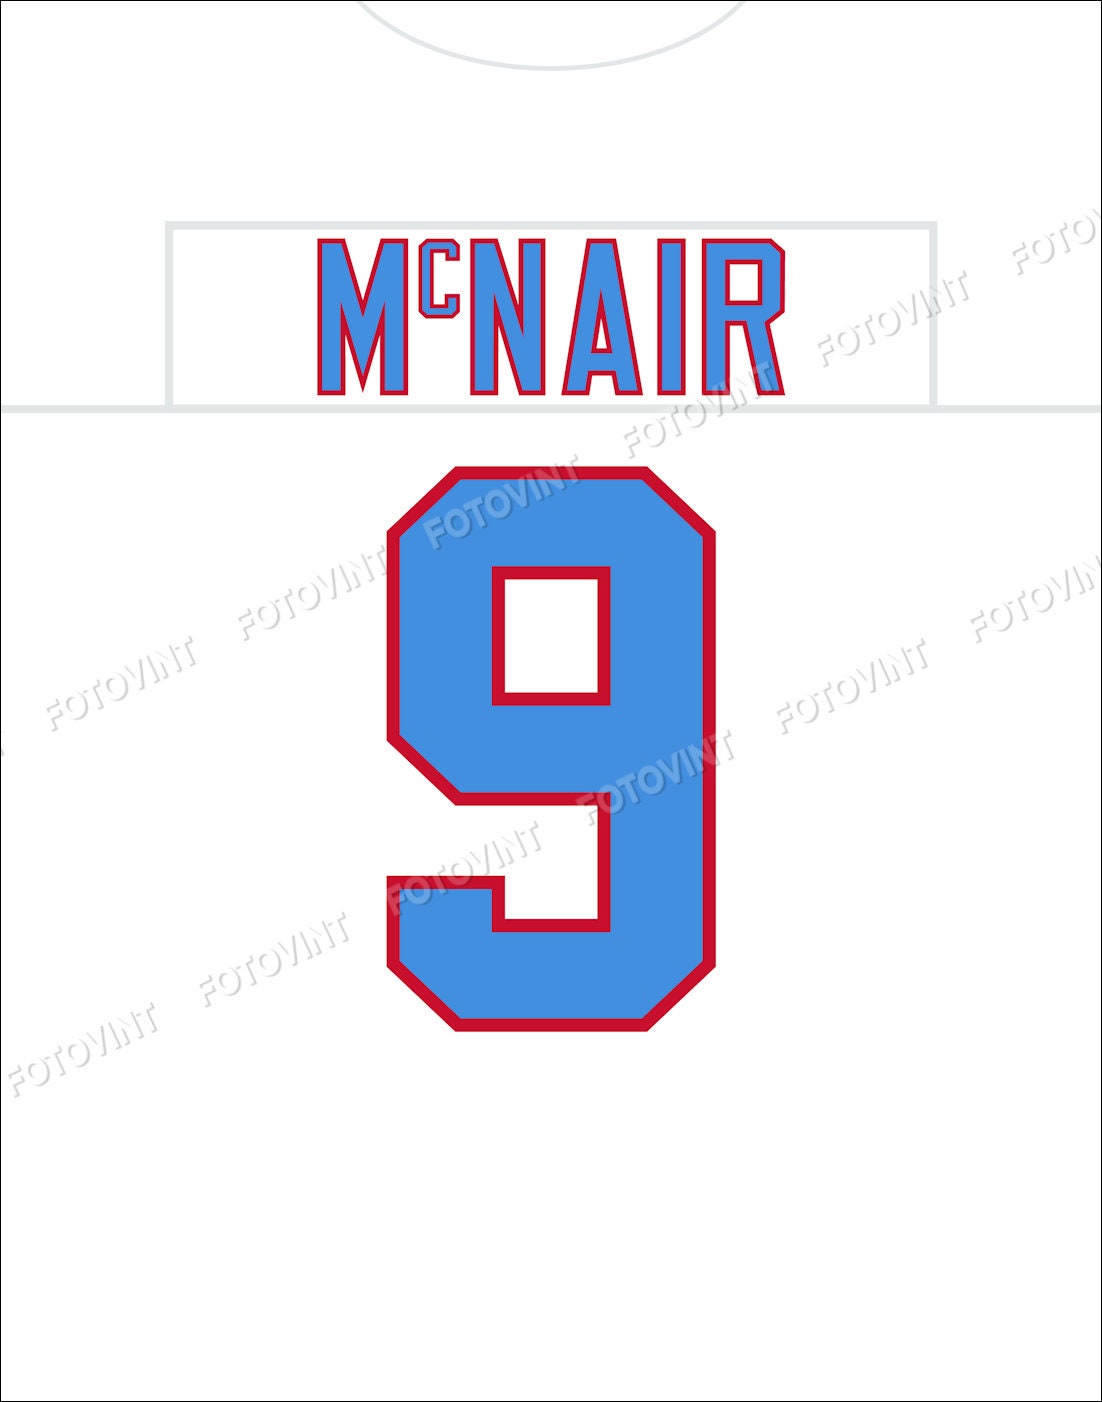 STEVE Mcnair Jersey Photo Picture Art HOUSTON OILERS Throwback 